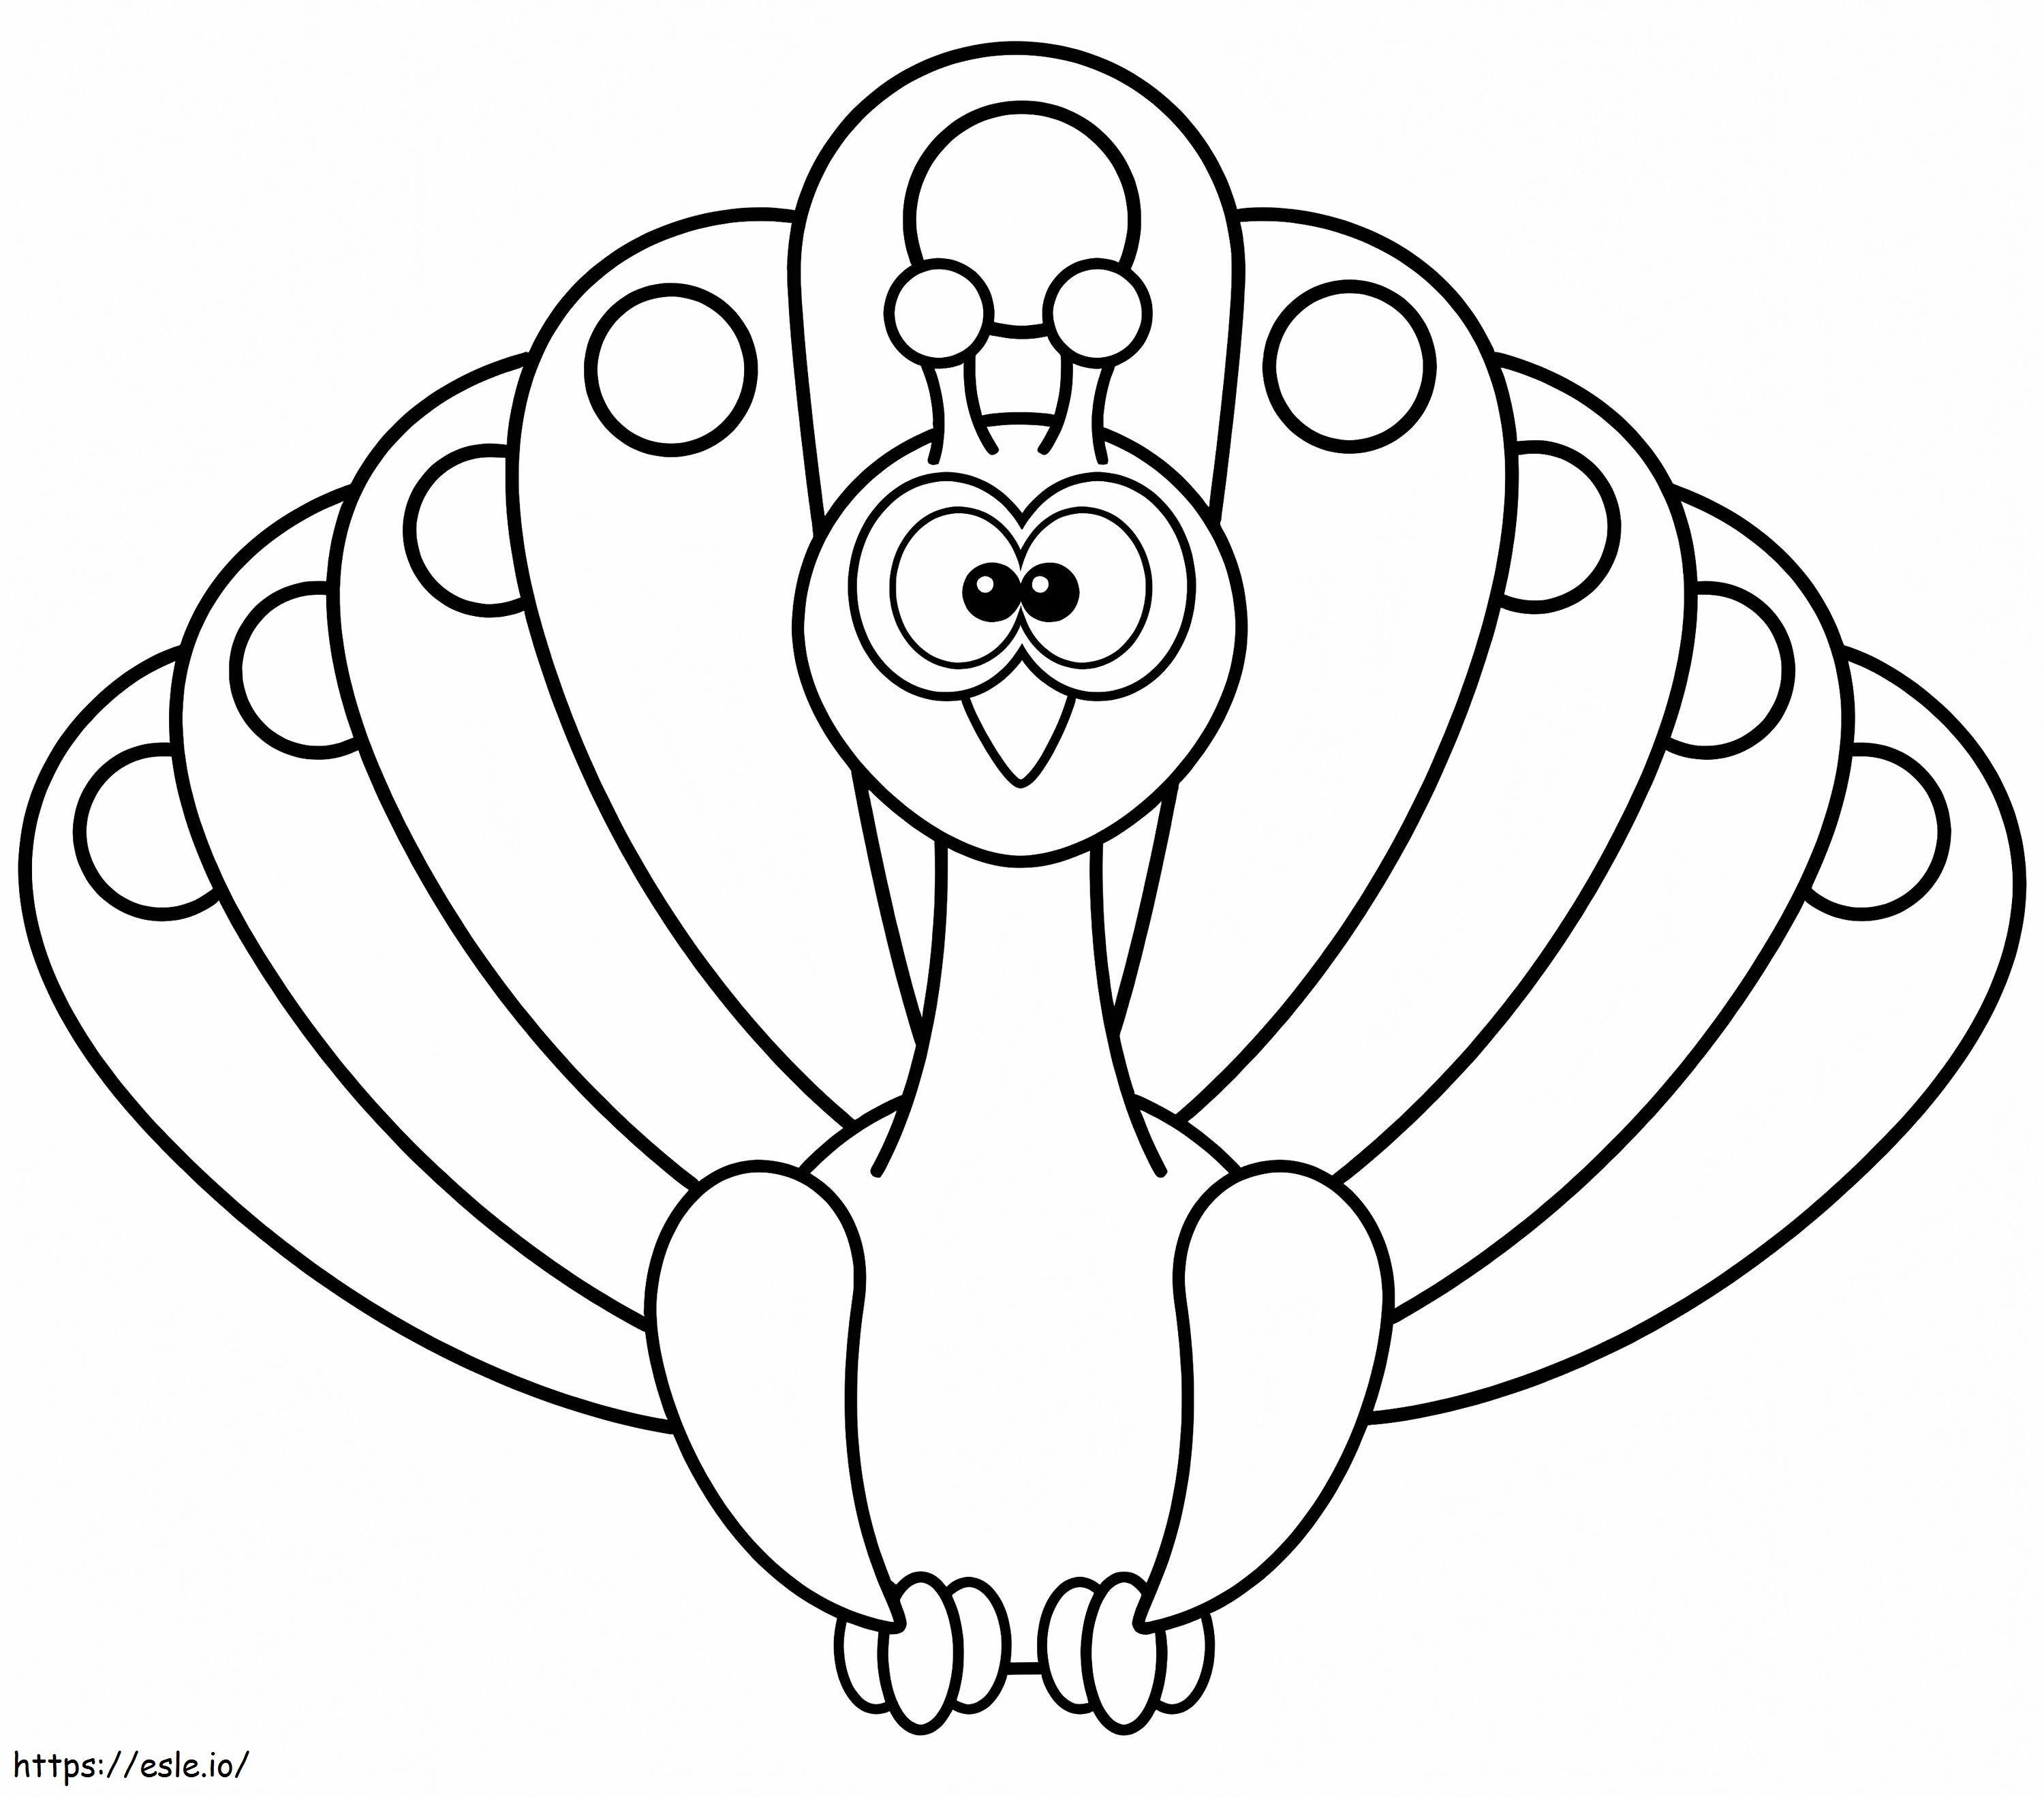 Adorable Peacock coloring page